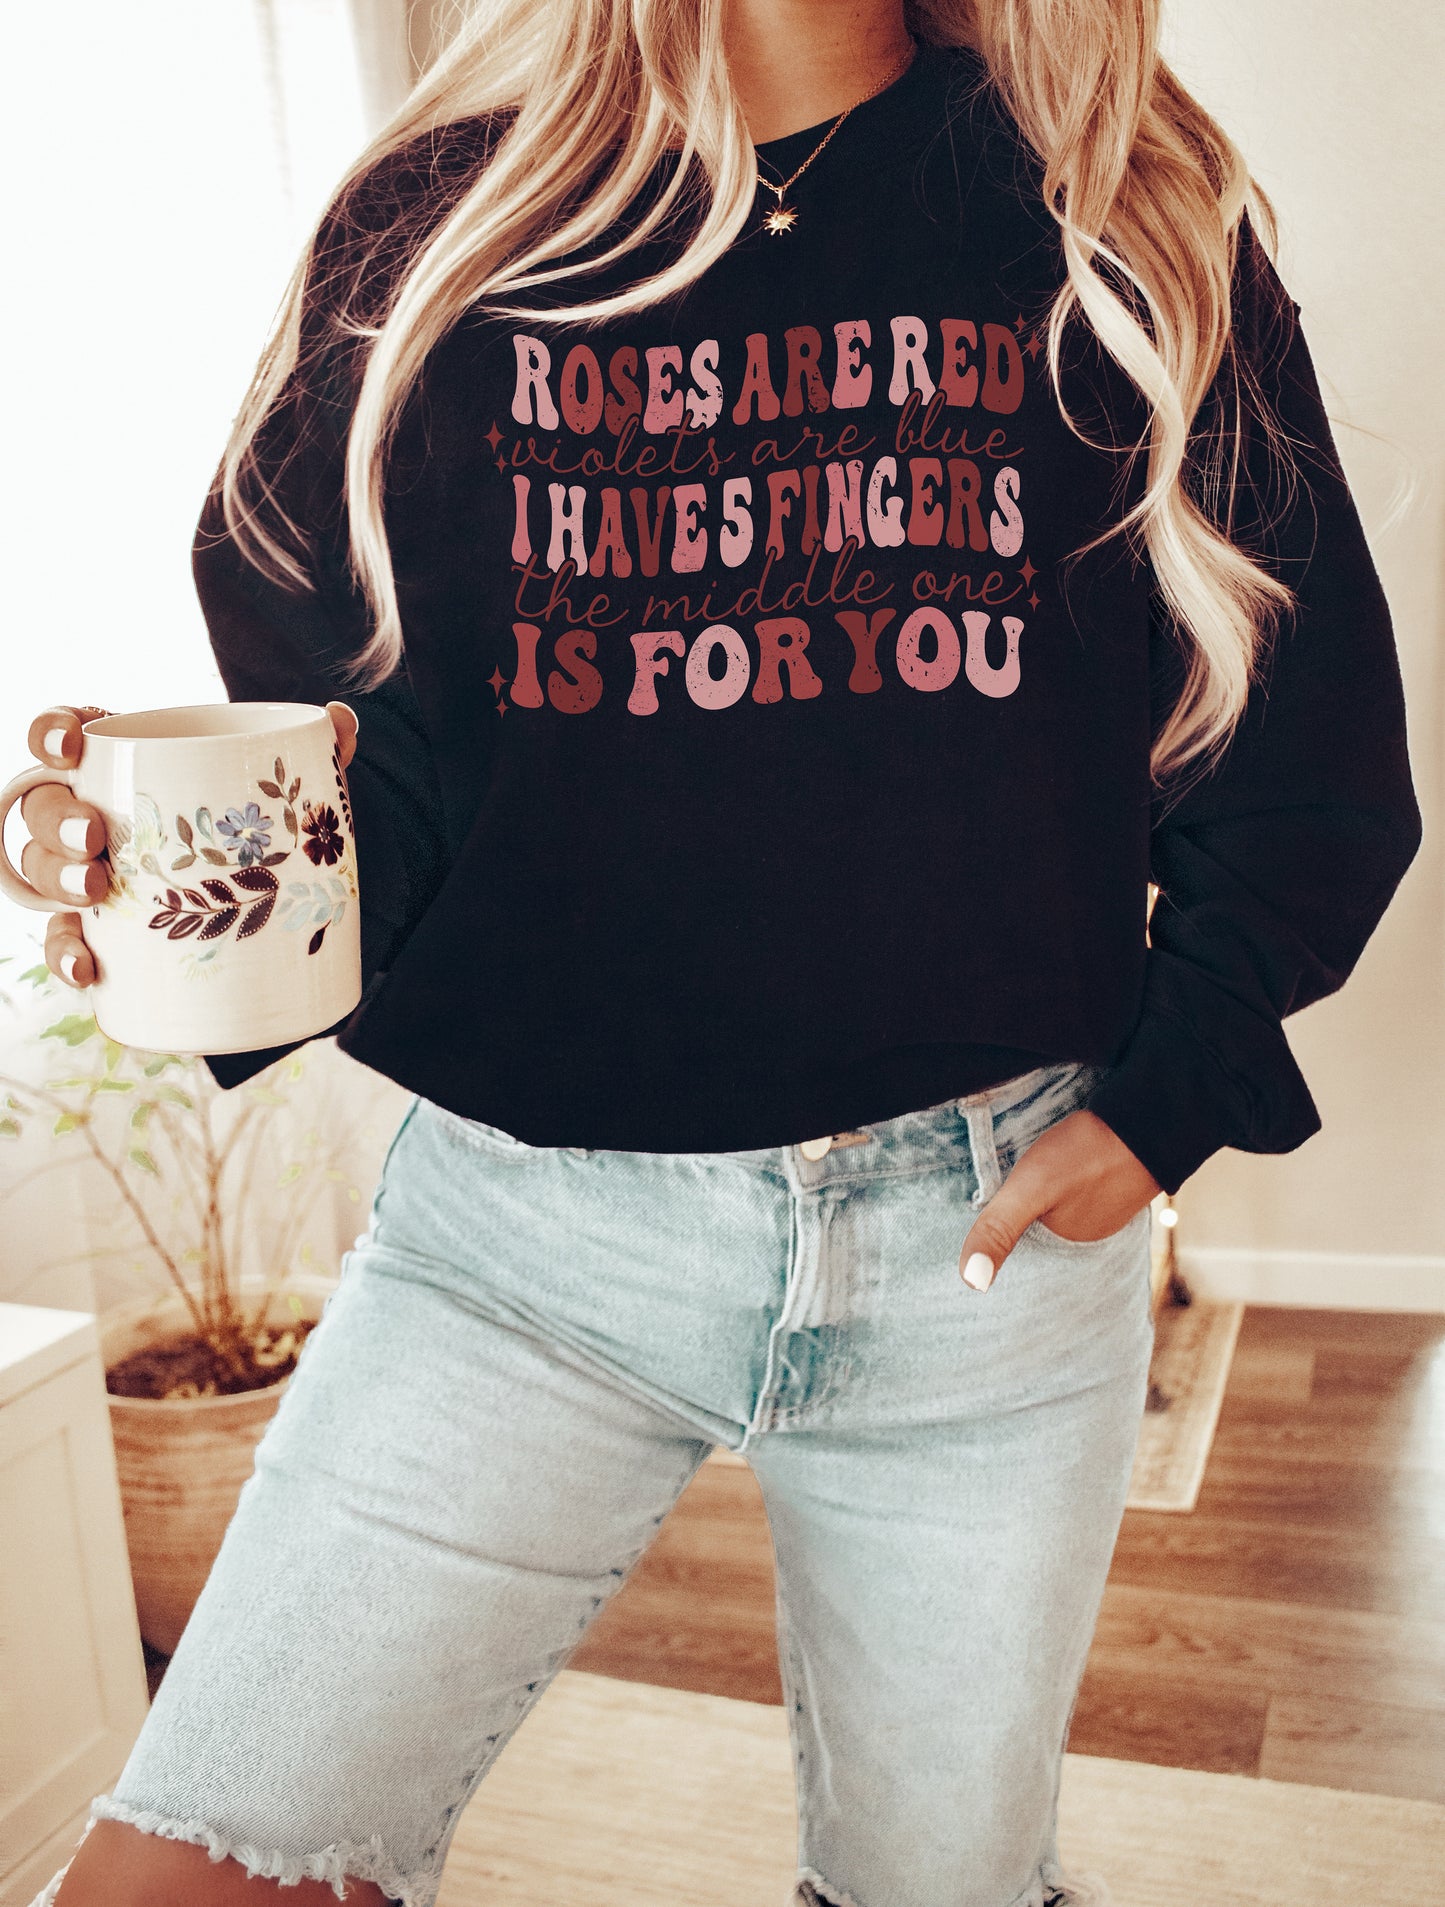 Roses Are Red Violets Are Blue I Have Five Fingers This One Is For You Sweatshirt